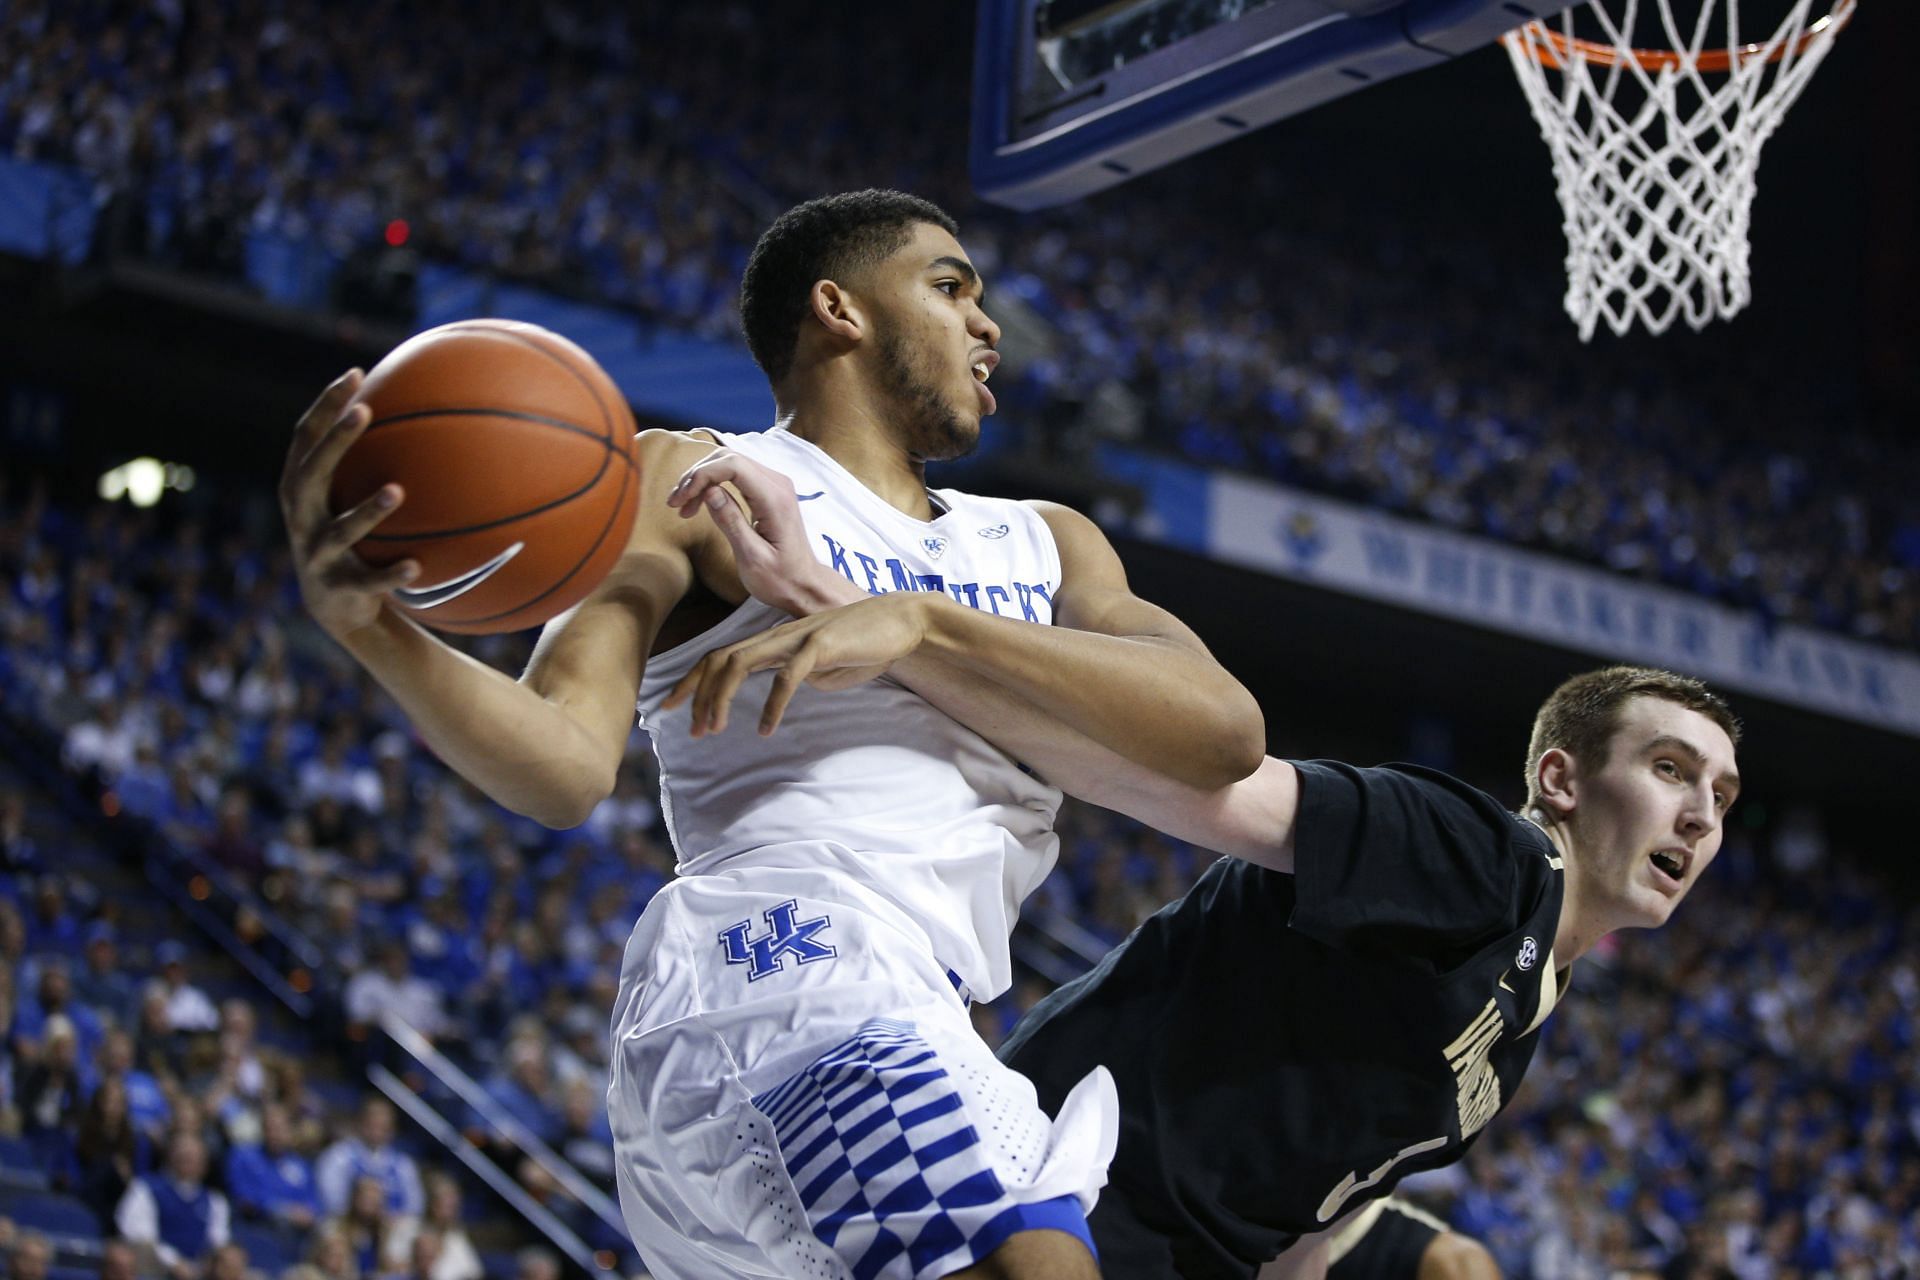 Karl-Anthony Towns played for Kentucky in the 2014-15 season.